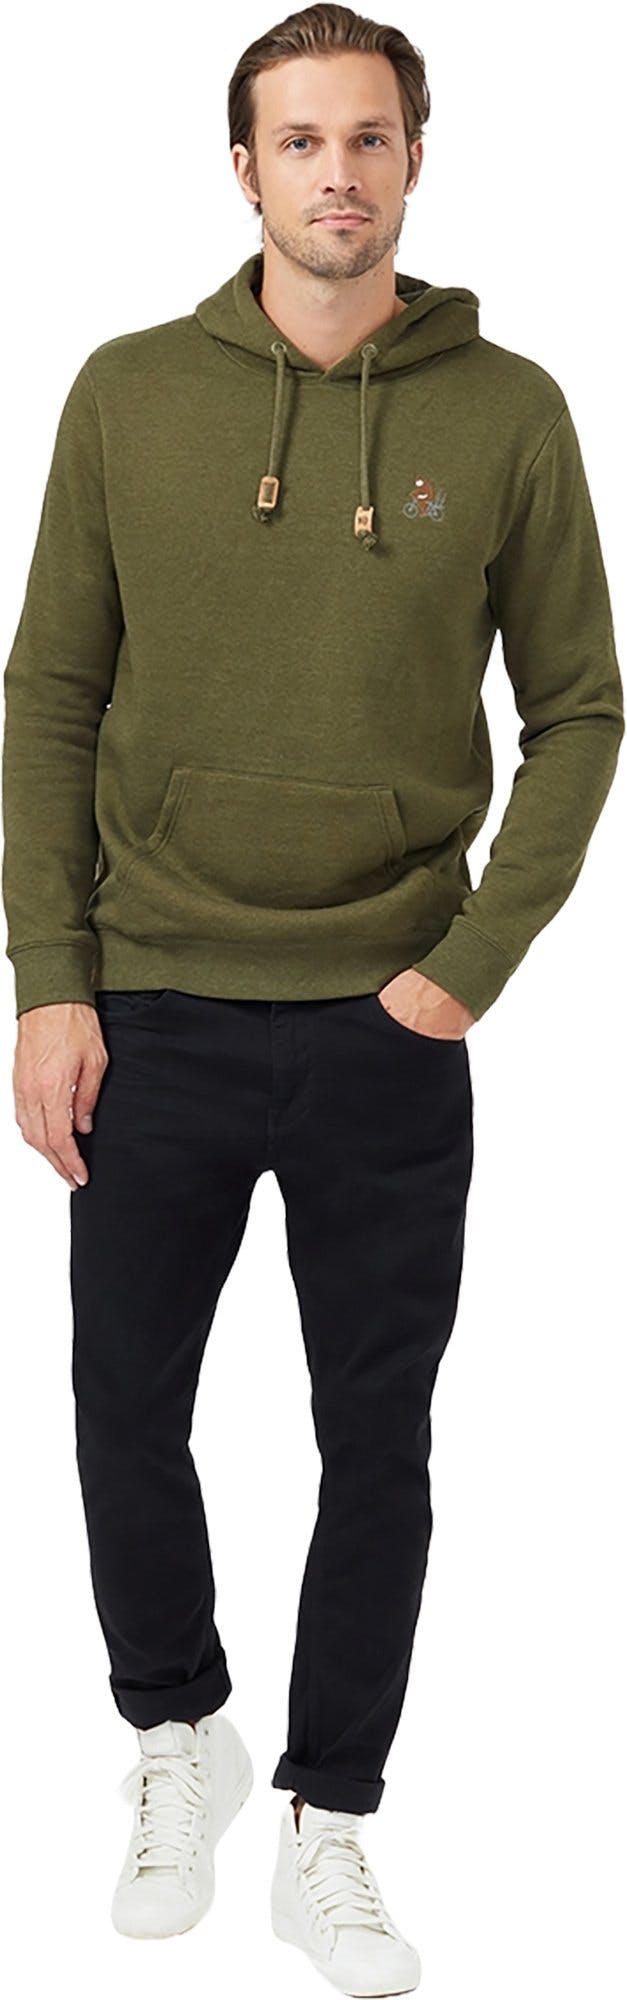 Product image for Sasquatch Classic Hoodie - Men's